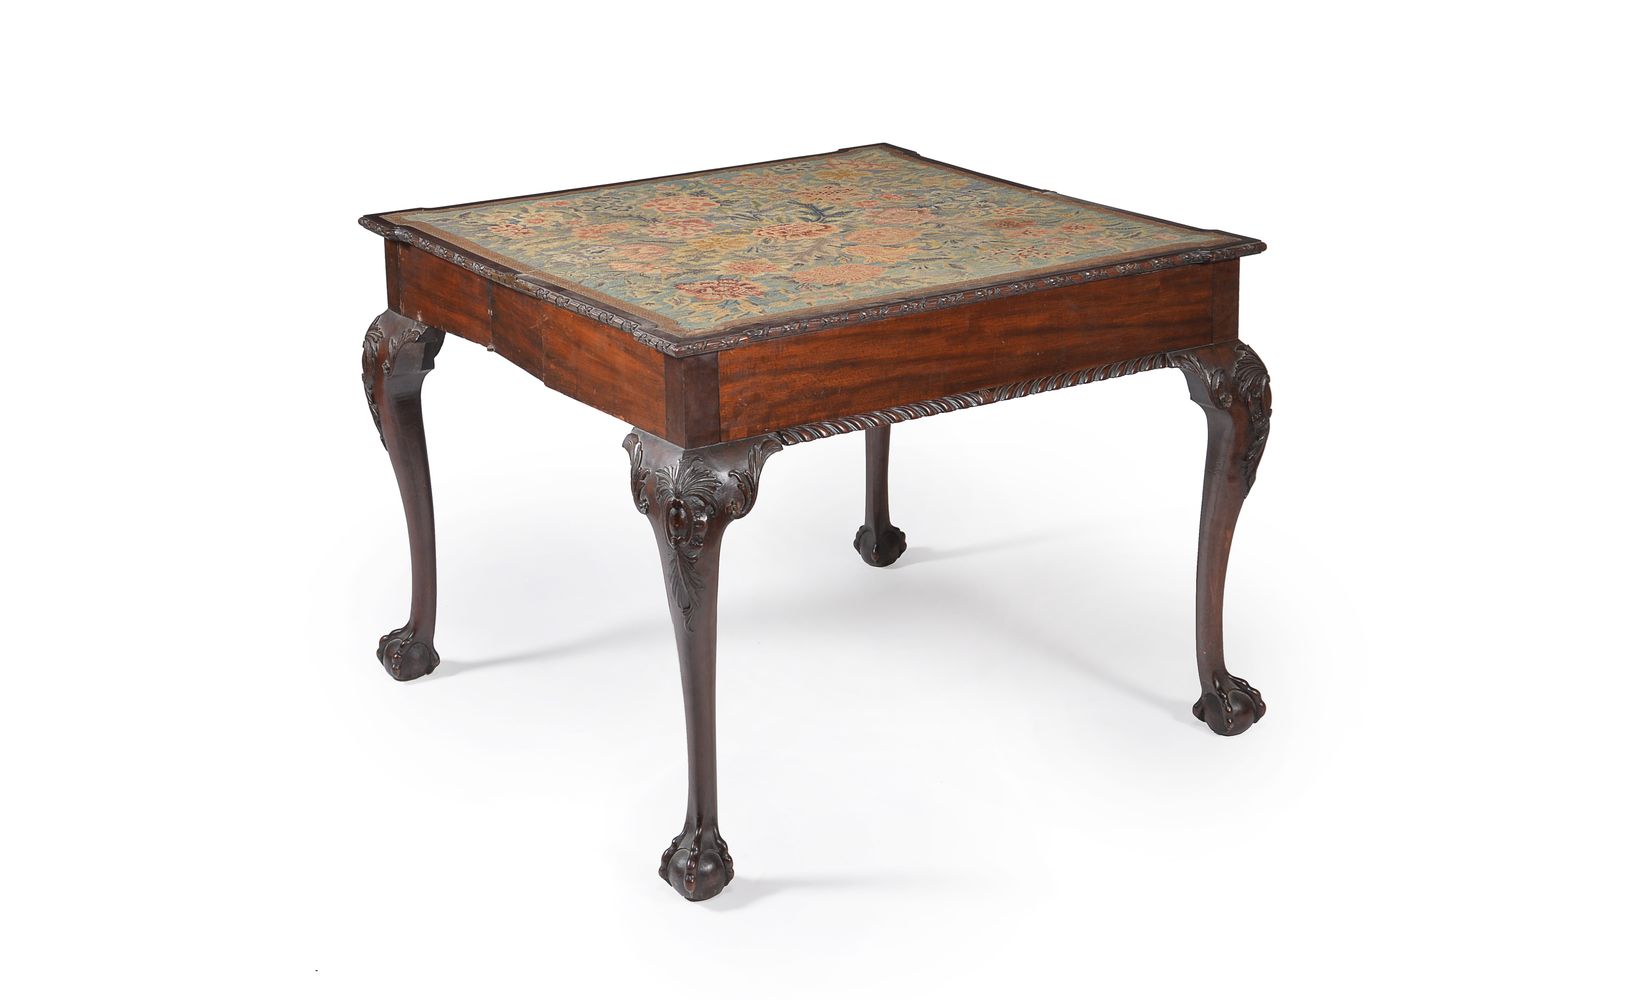 A mahogany and needlework inset folding card table - Image 3 of 5